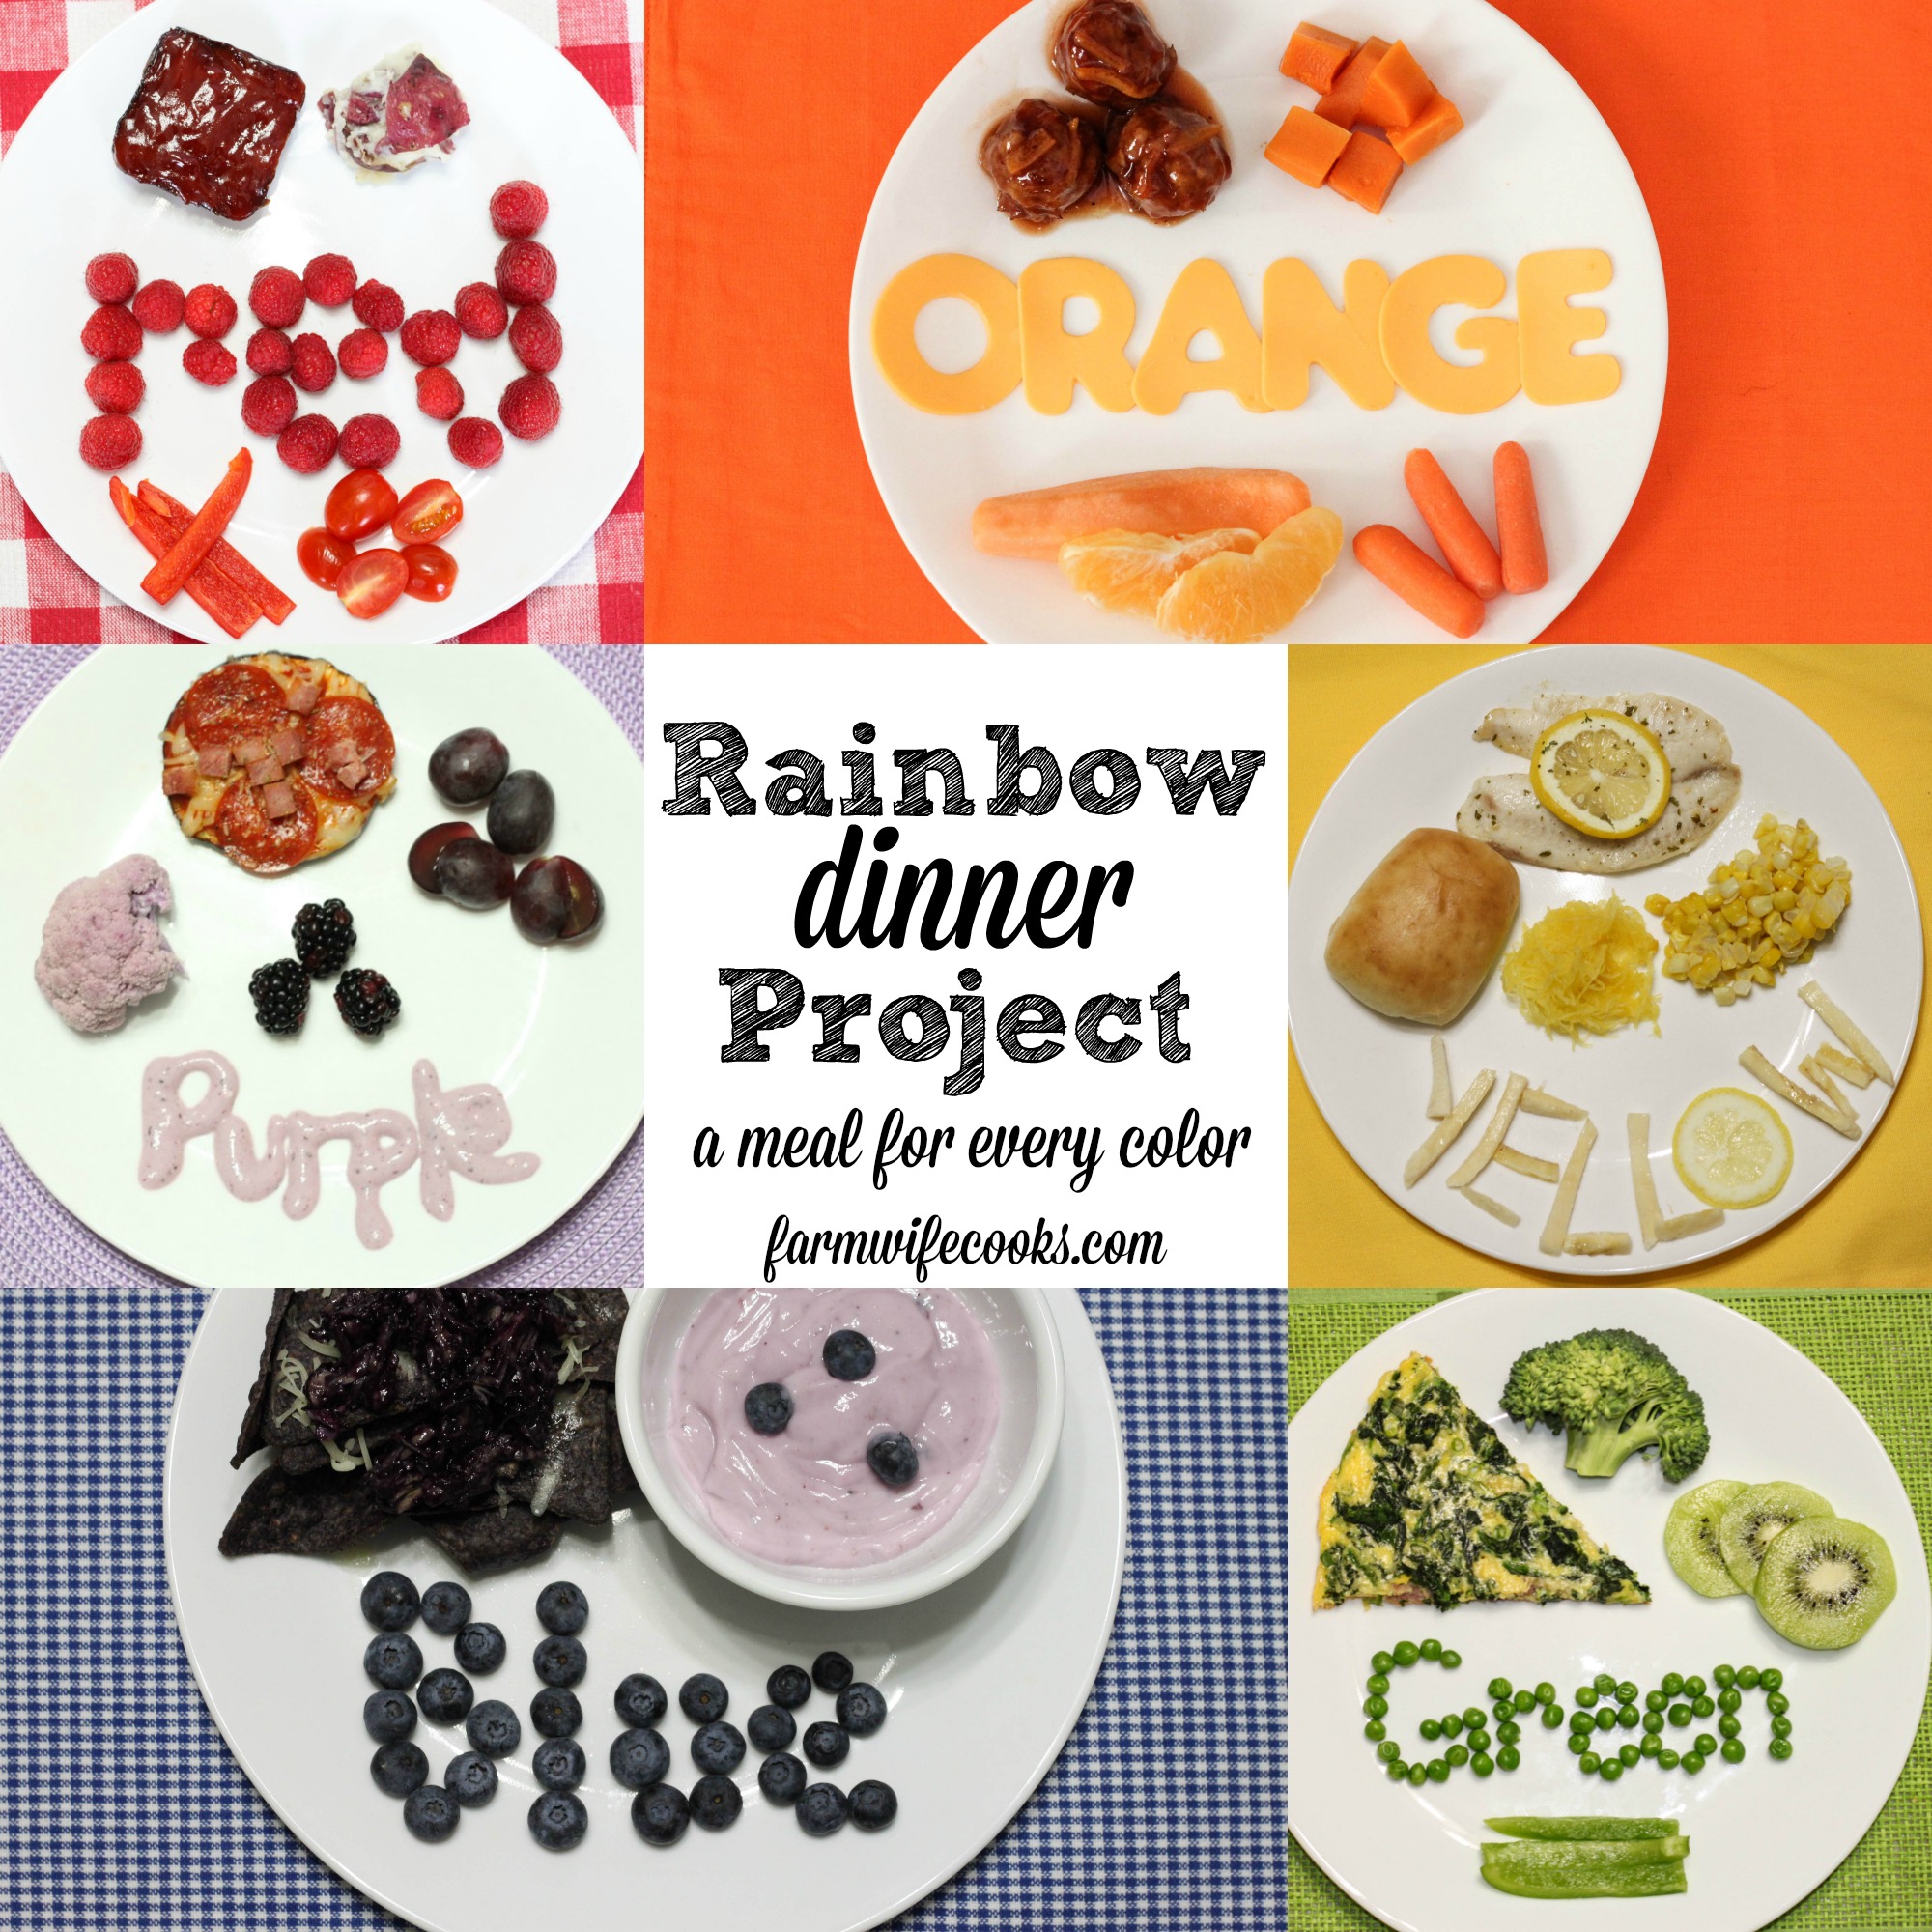 Rainbow Dinner Project – Eat, Drink, Play by Color